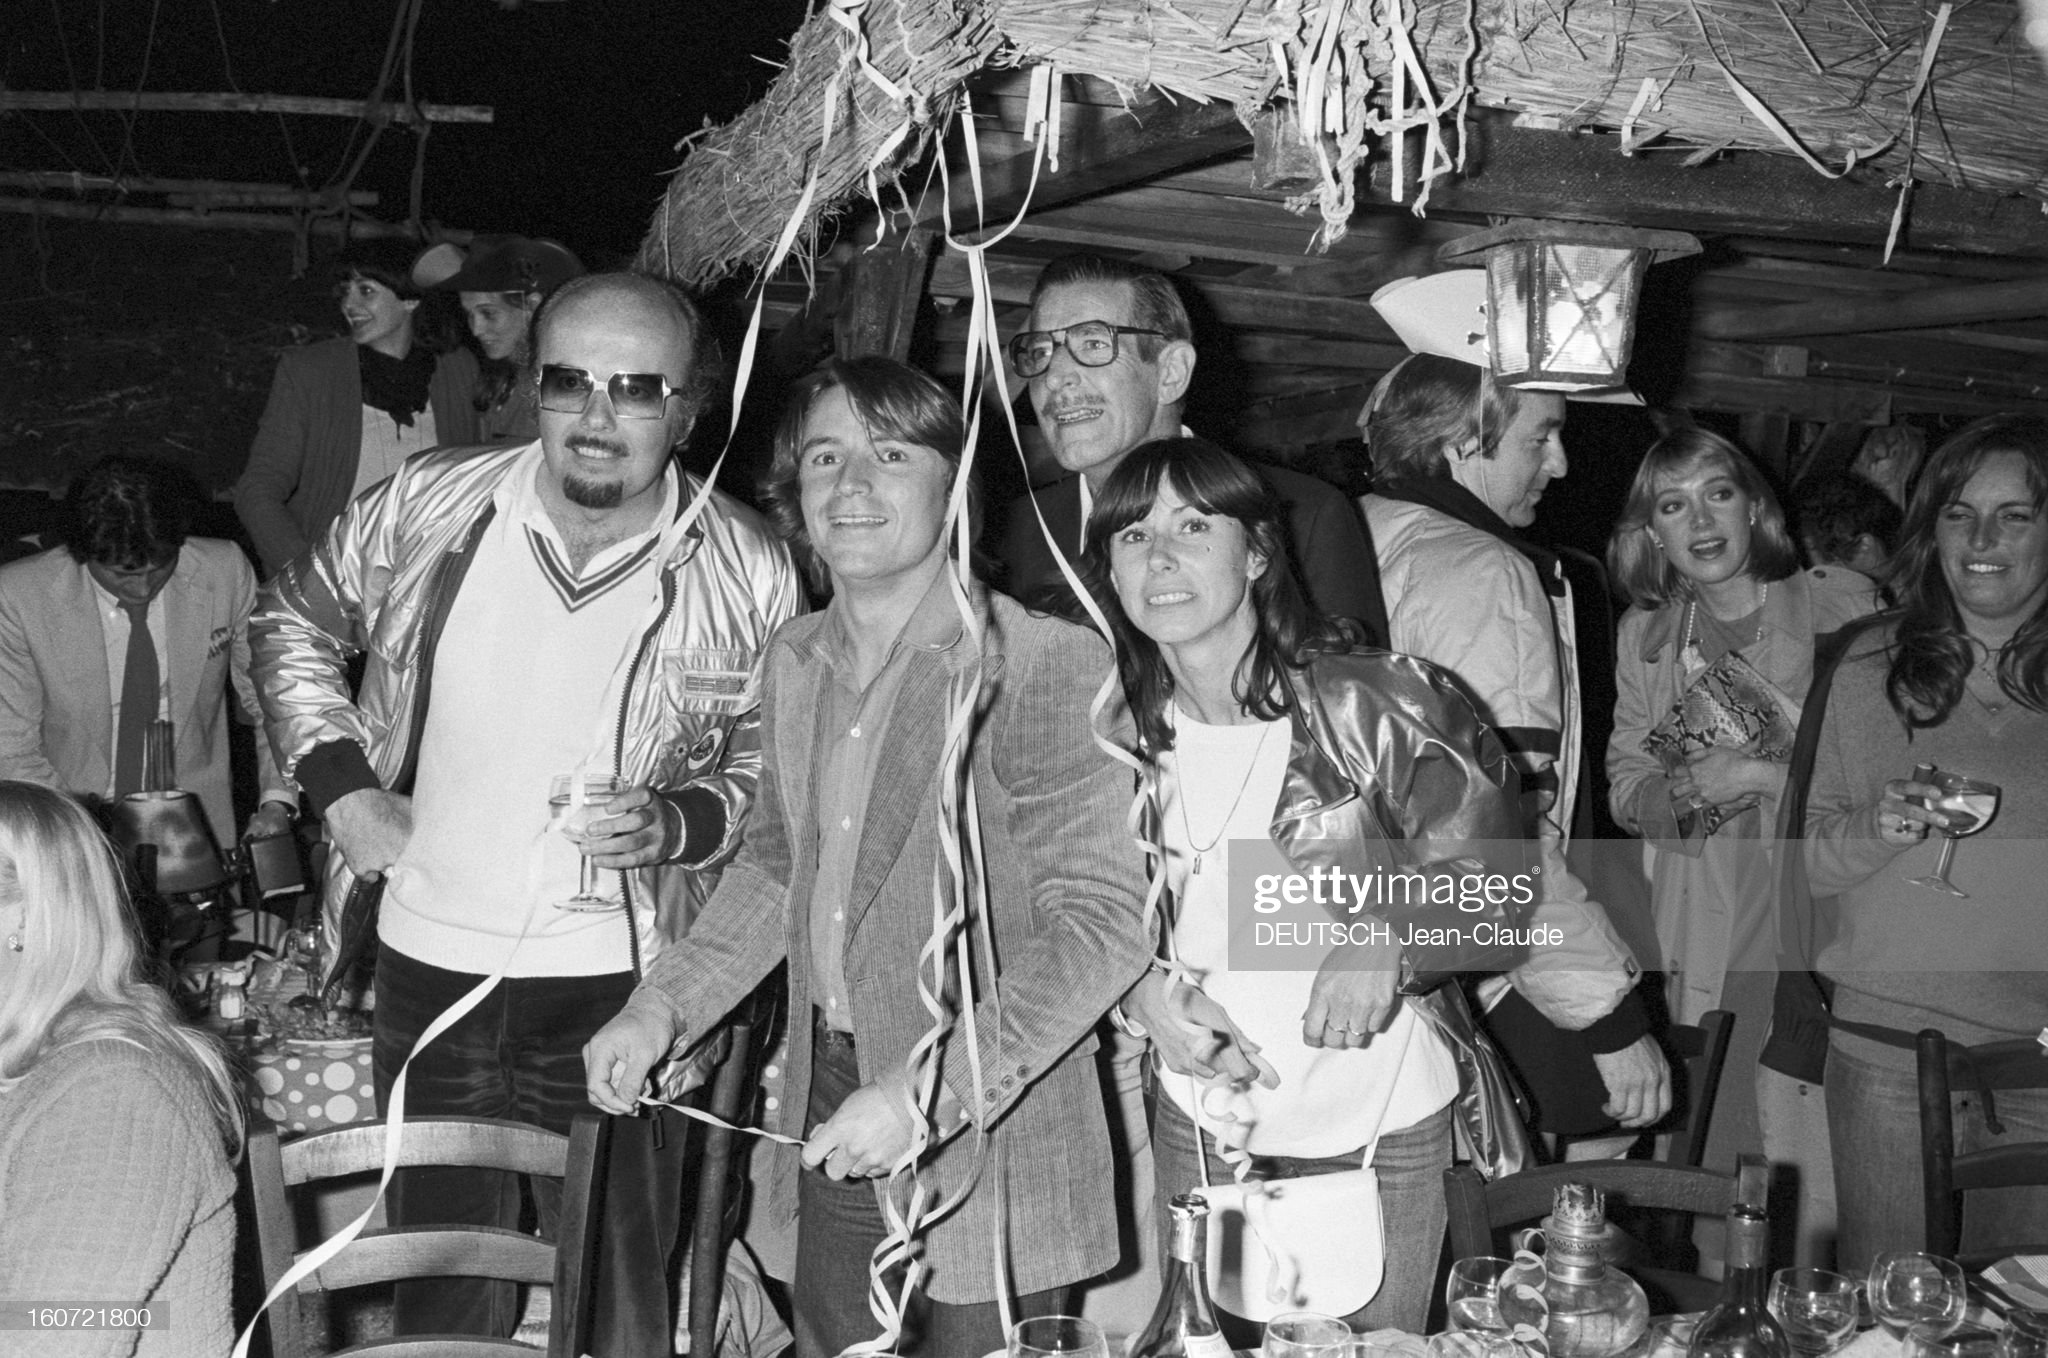 On May 18, 1980, during the Monaco Formula 1 Grand Prix, the industrial stylist David Thieme, with sunglasses and a drink in his hand and René Arnoux with his wife Kelly at a party at the 'New Jimmy's' in Monte-Carlo. 